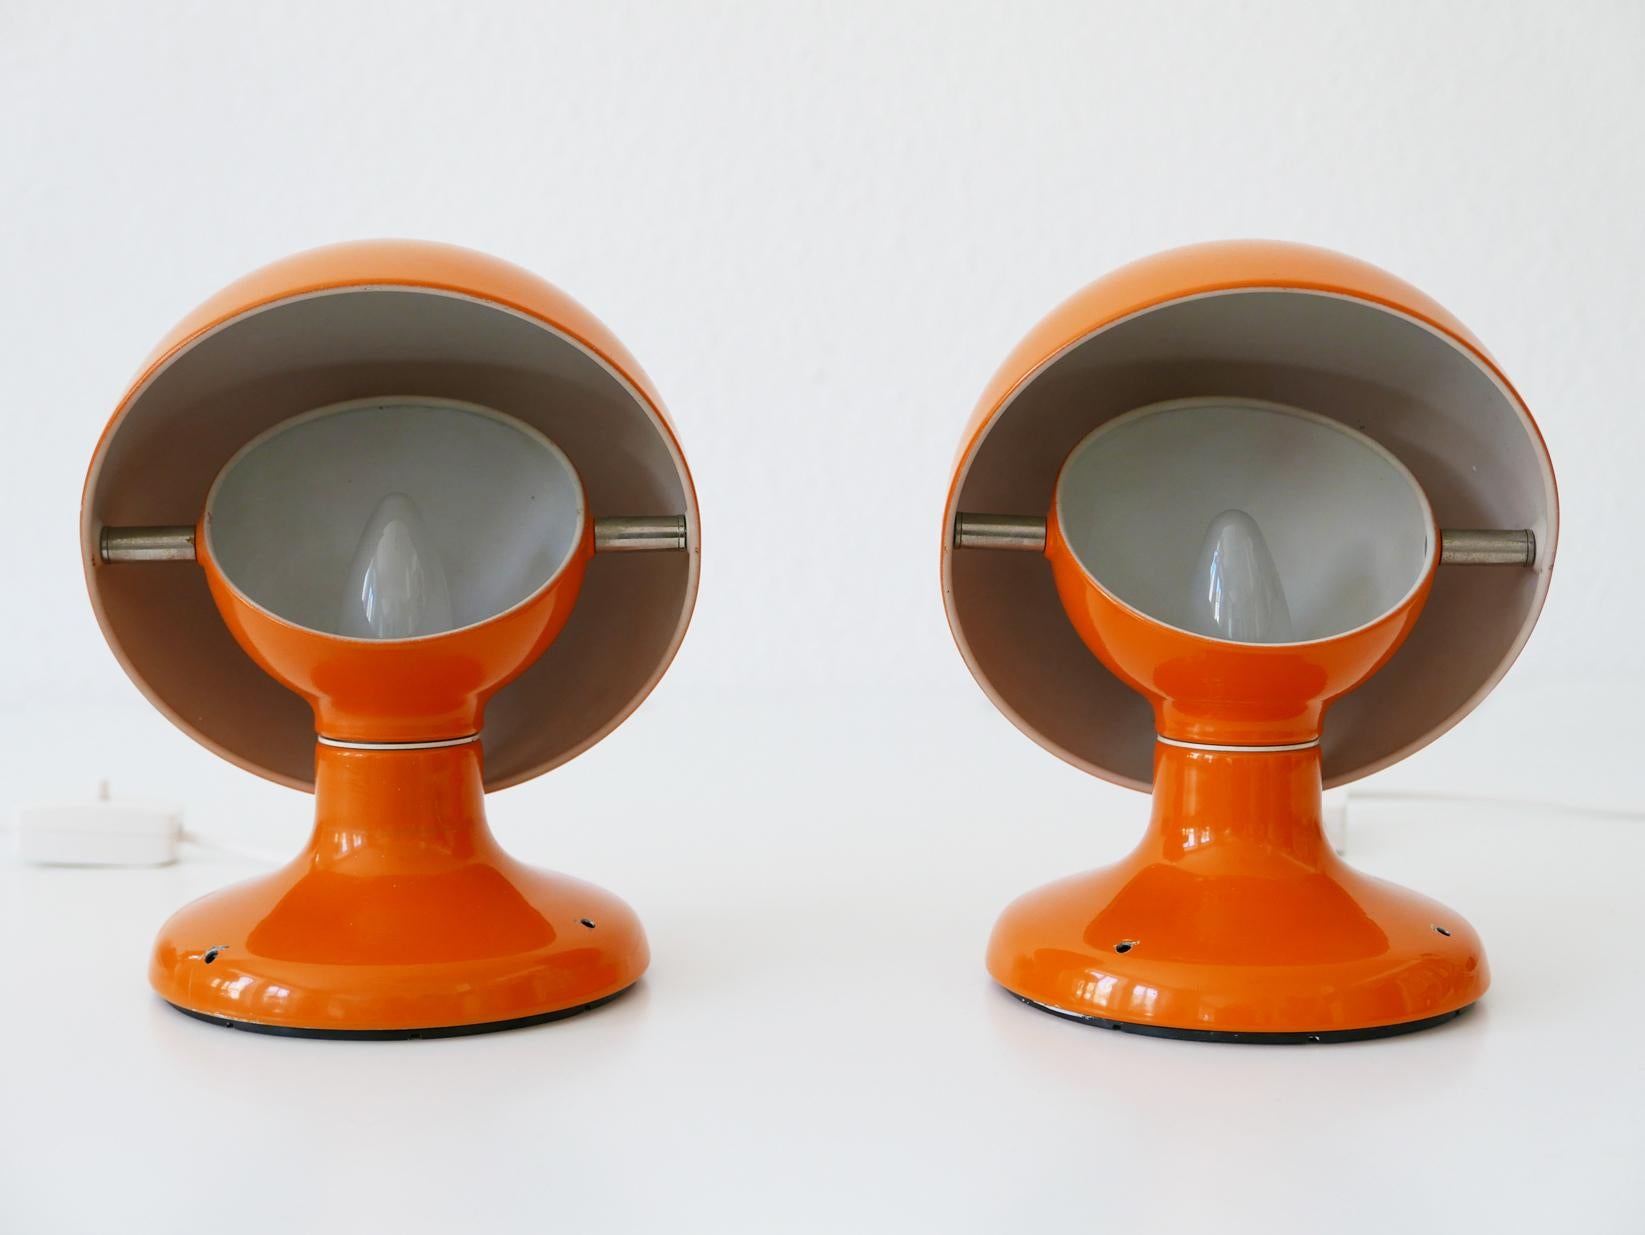 Pair of Mid-Century Modern Jucker Table Lamps by Afra & Tobia Scarpa, 1960s For Sale 4